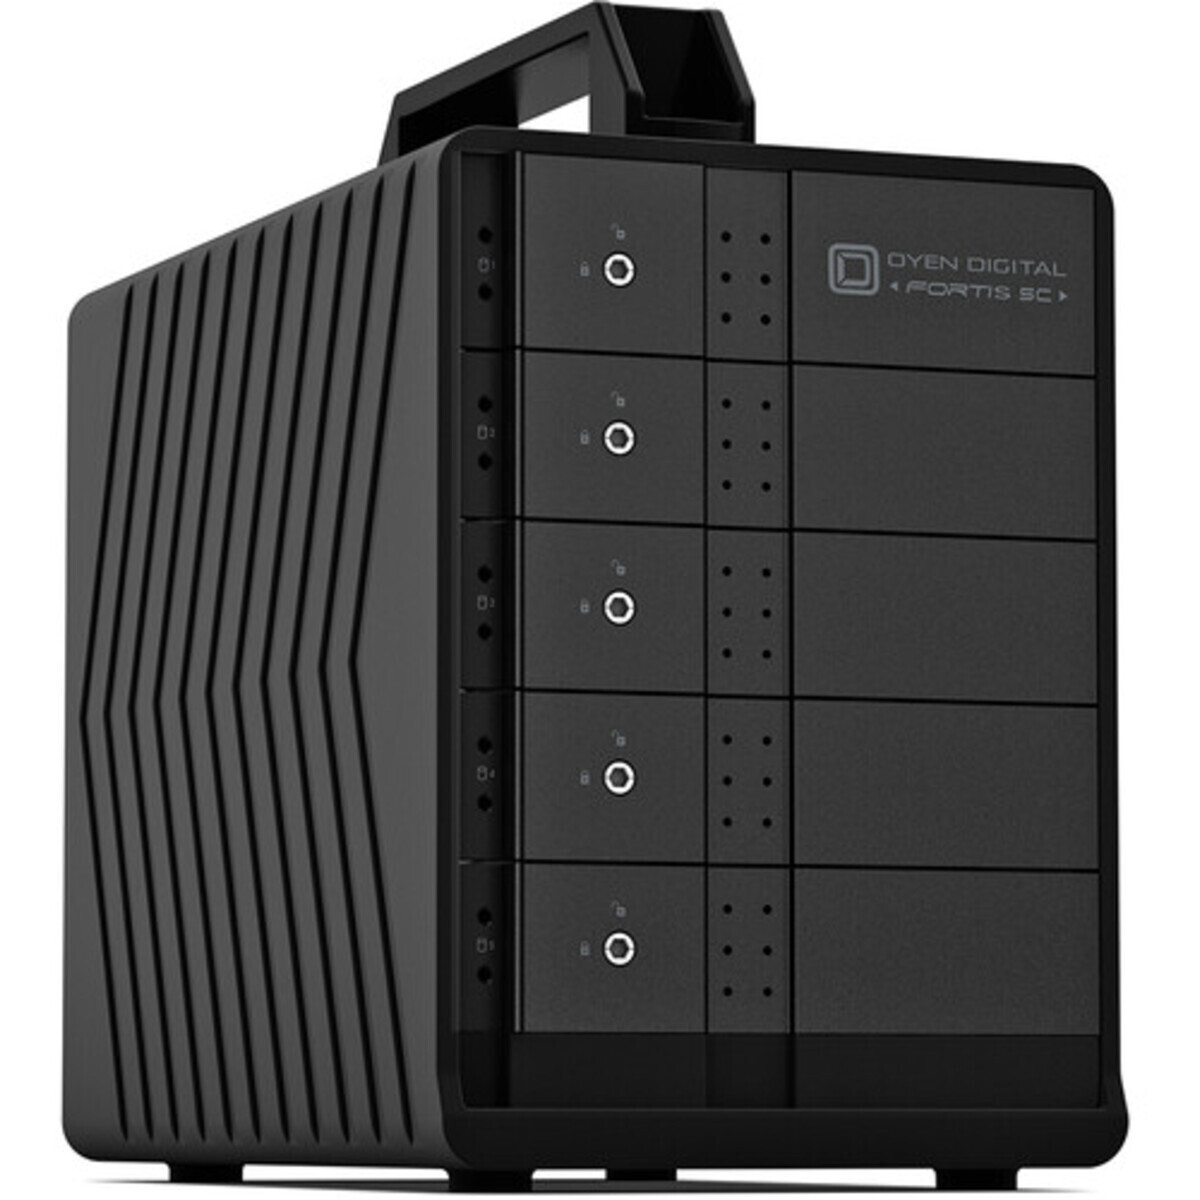 OYEN Fortis 5C 90tb 5-Bay Desktop Multimedia / Power User / Business DAS - Direct Attached Storage Device 5x18tb Toshiba Enterprise Capacity MG09ACA18TE 3.5 7200rpm SATA 6Gb/s HDD ENTERPRISE Class Drives Installed - Burn-In Tested Fortis 5C